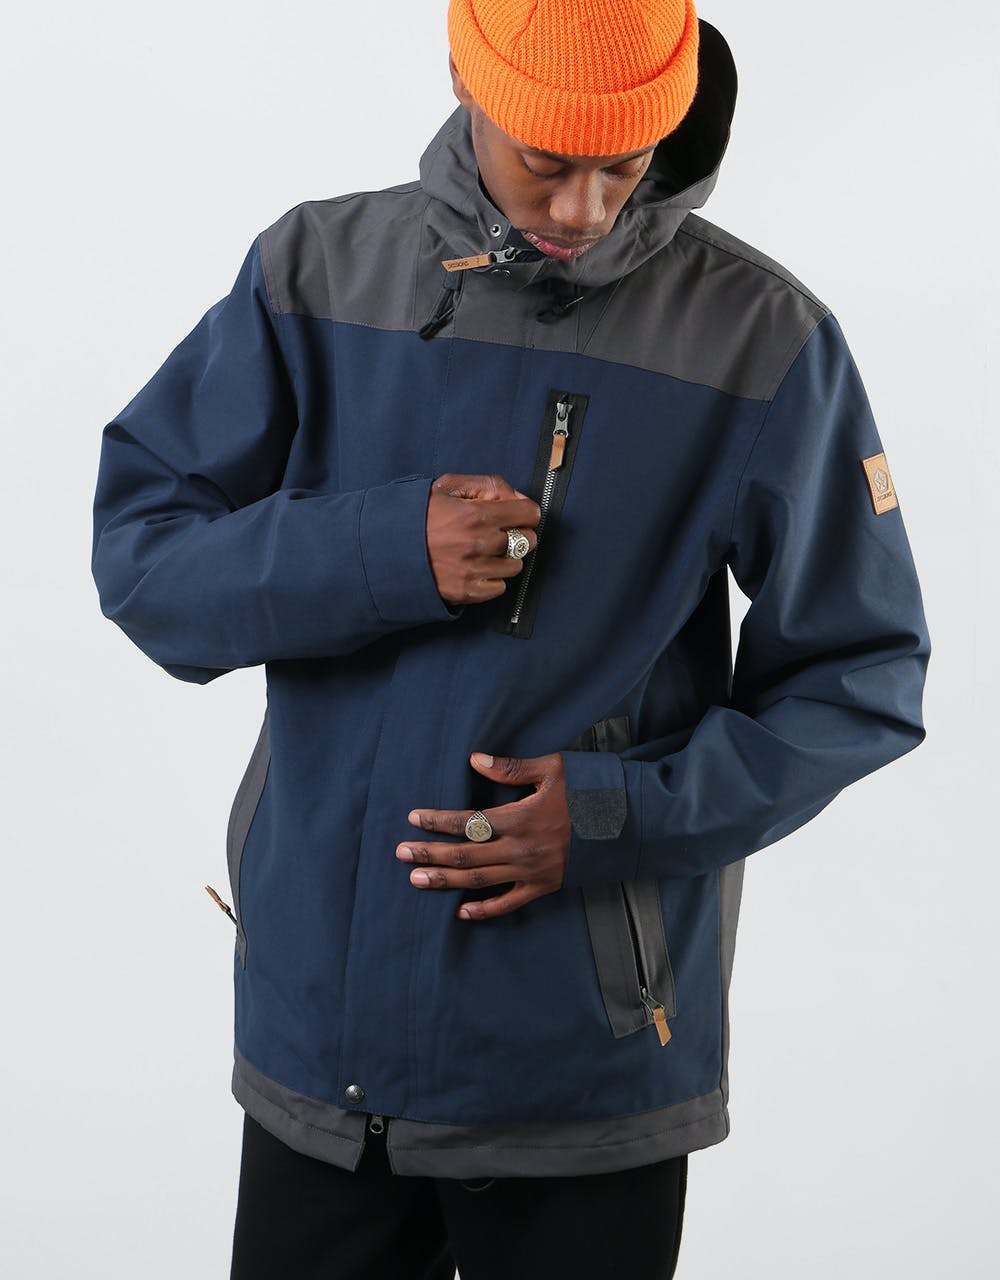 Sessions Scout Snowboard Jacket - Navy/Dark Grey